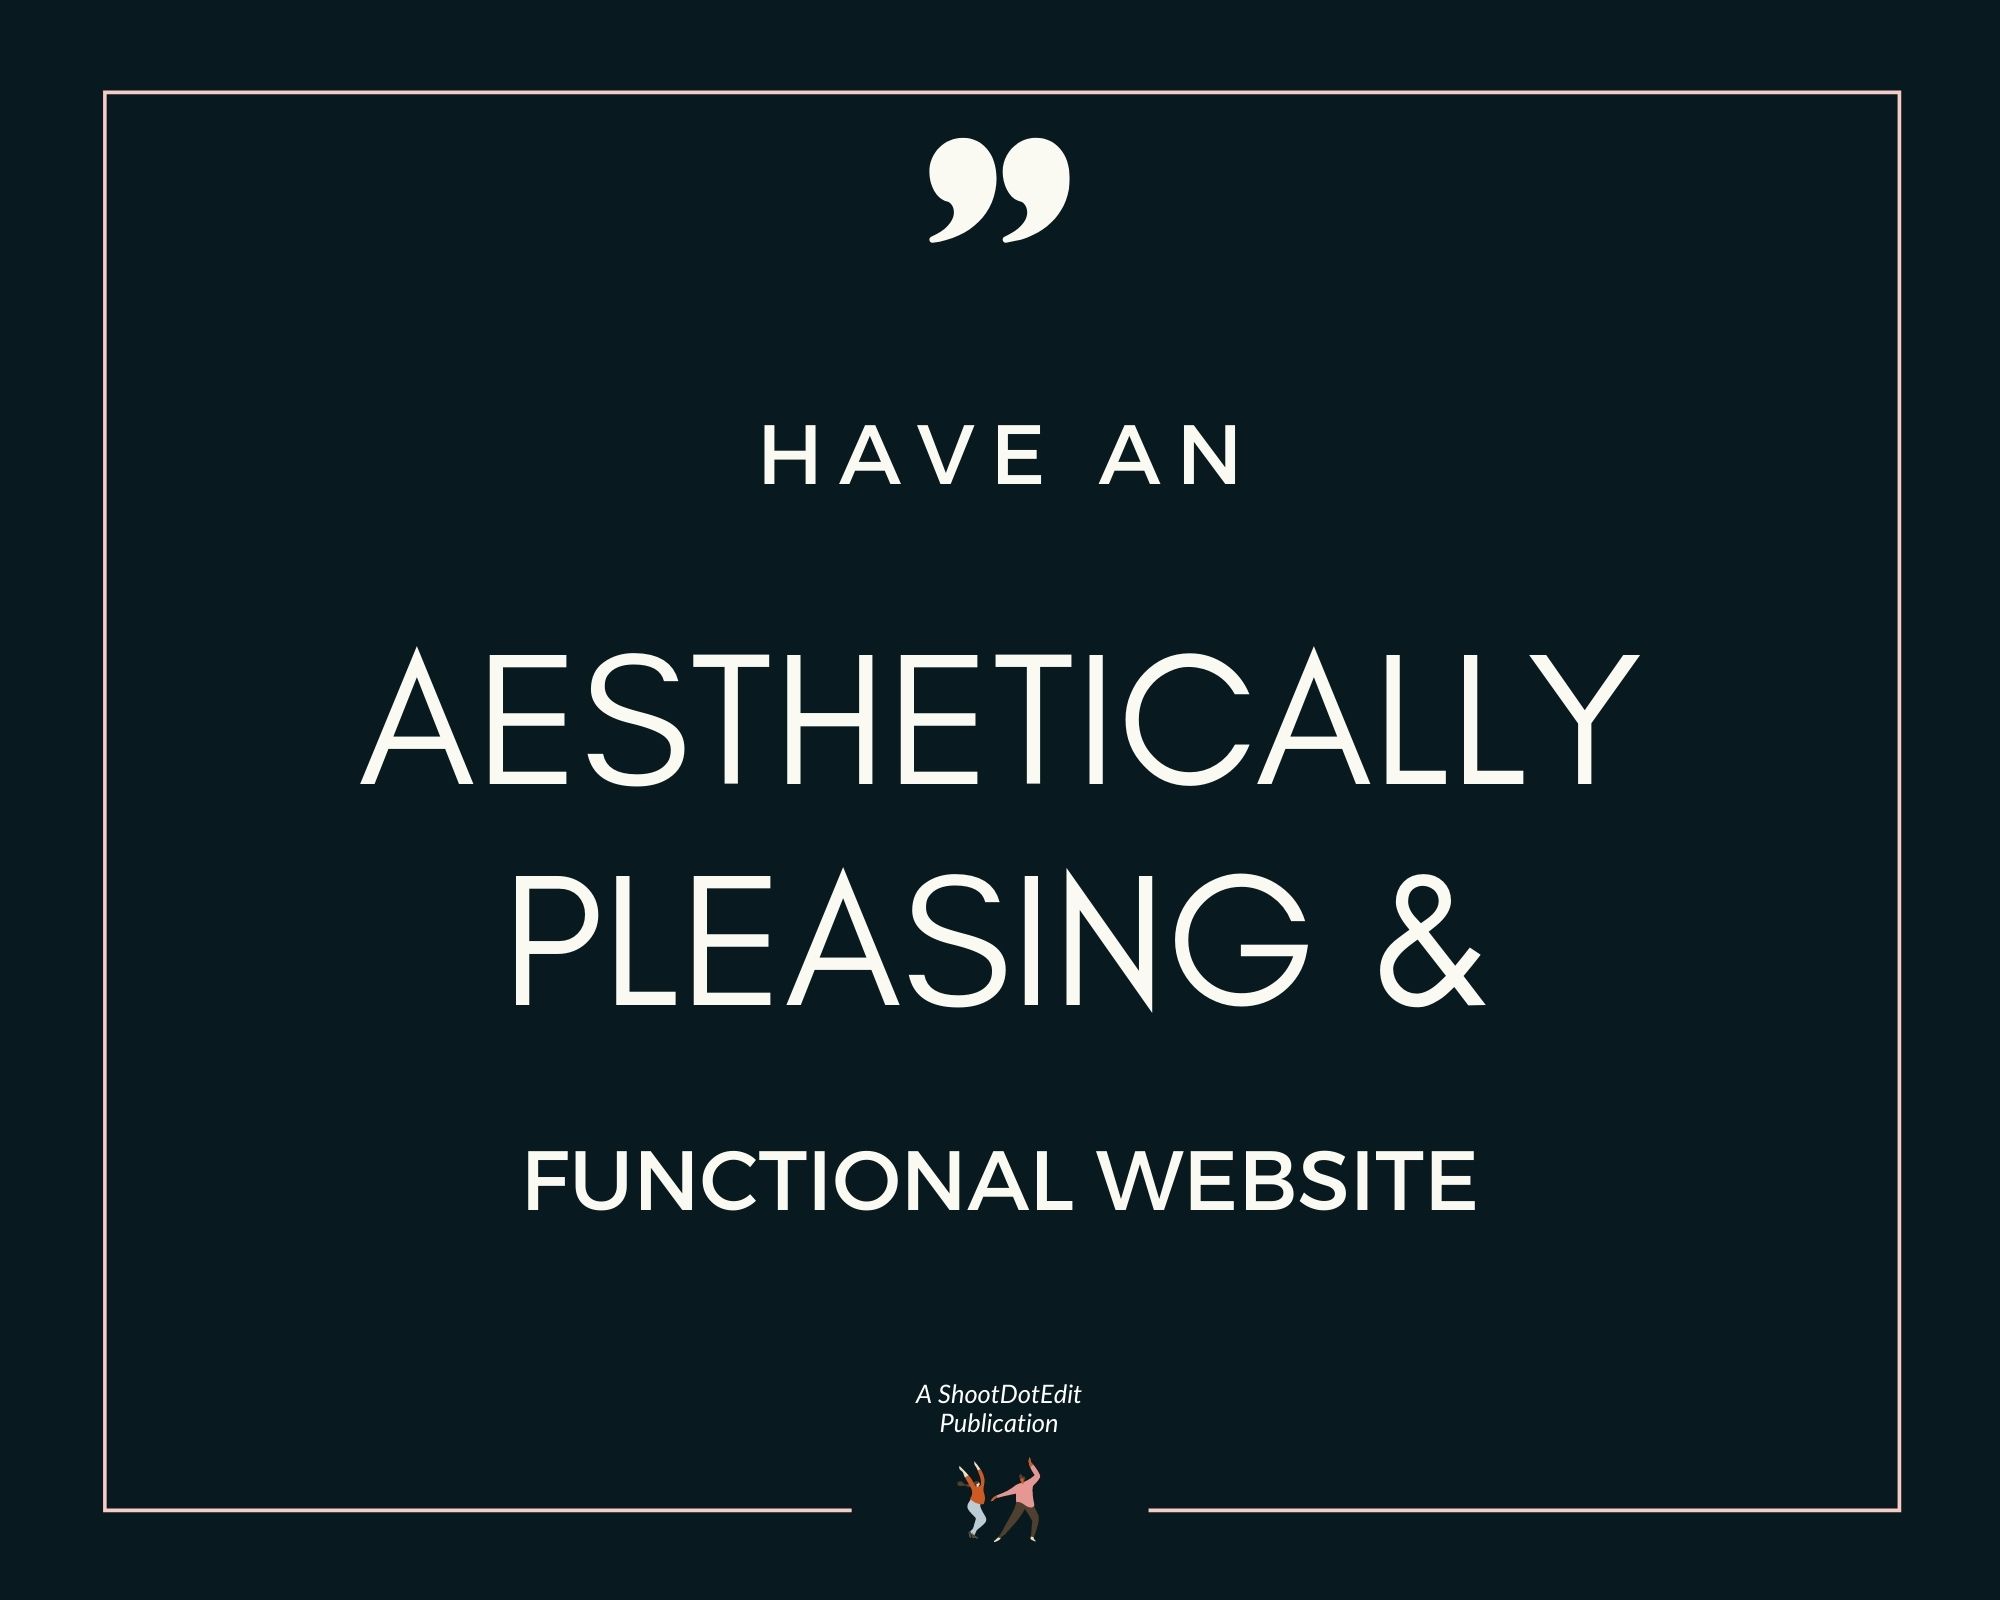 Infographic stating have an aesthetically pleasing and functional website